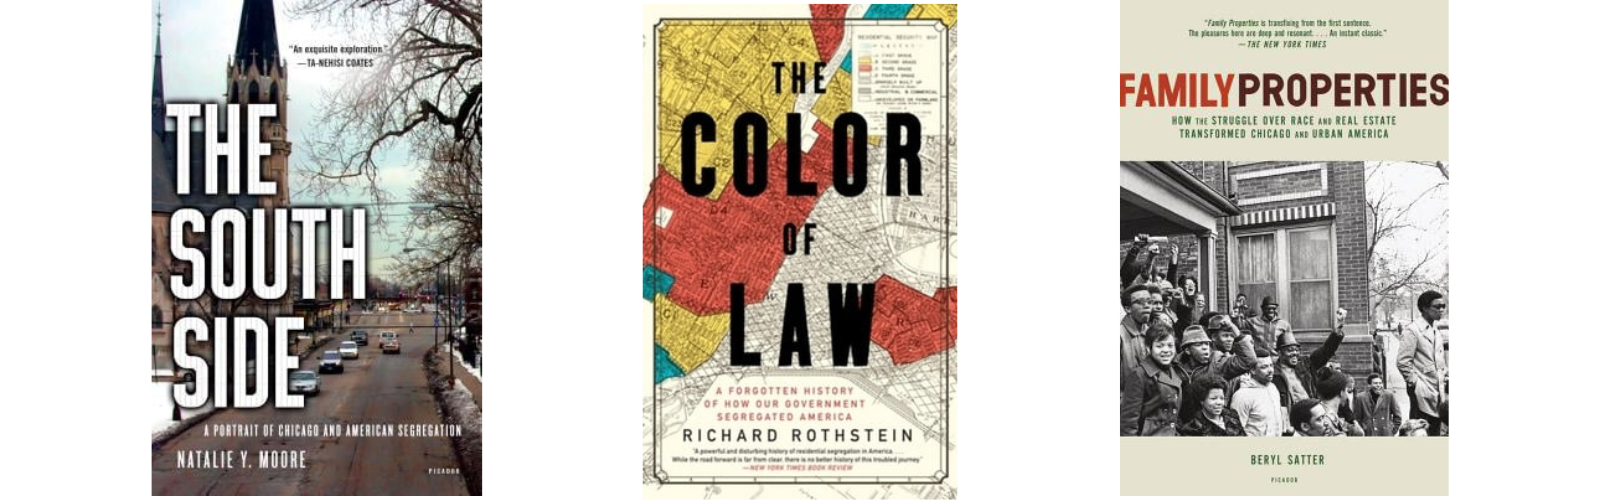 Covers of three books: South Side by Natalie Moore, Color of Law by Richard Rothstein, and Family Properties by Beryl Satter